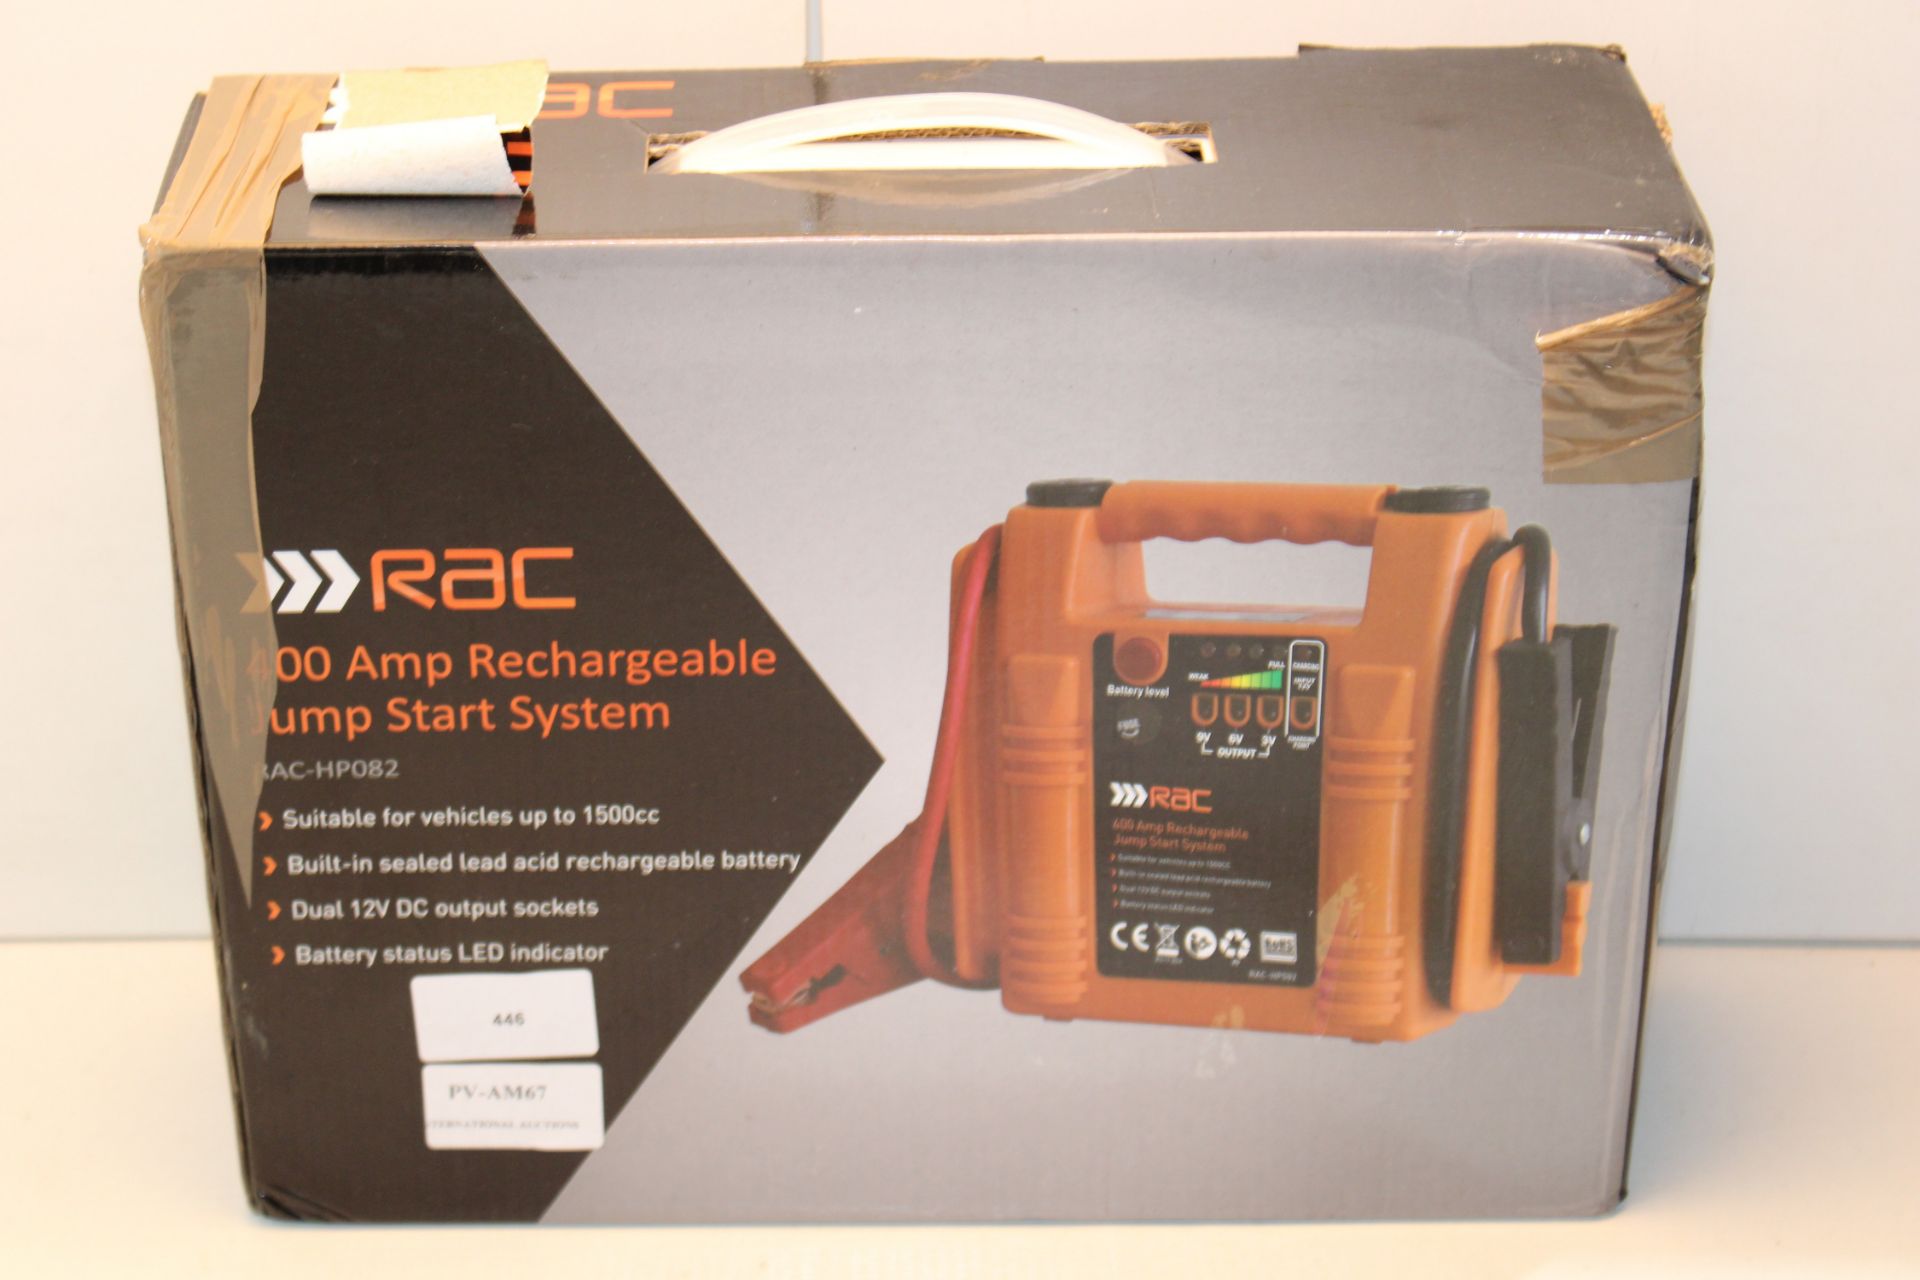 BOXED RAC 400 AMP RECHARGEABLE JUMP START SYSTEM RRP £44.99Condition ReportAppraisal Available on